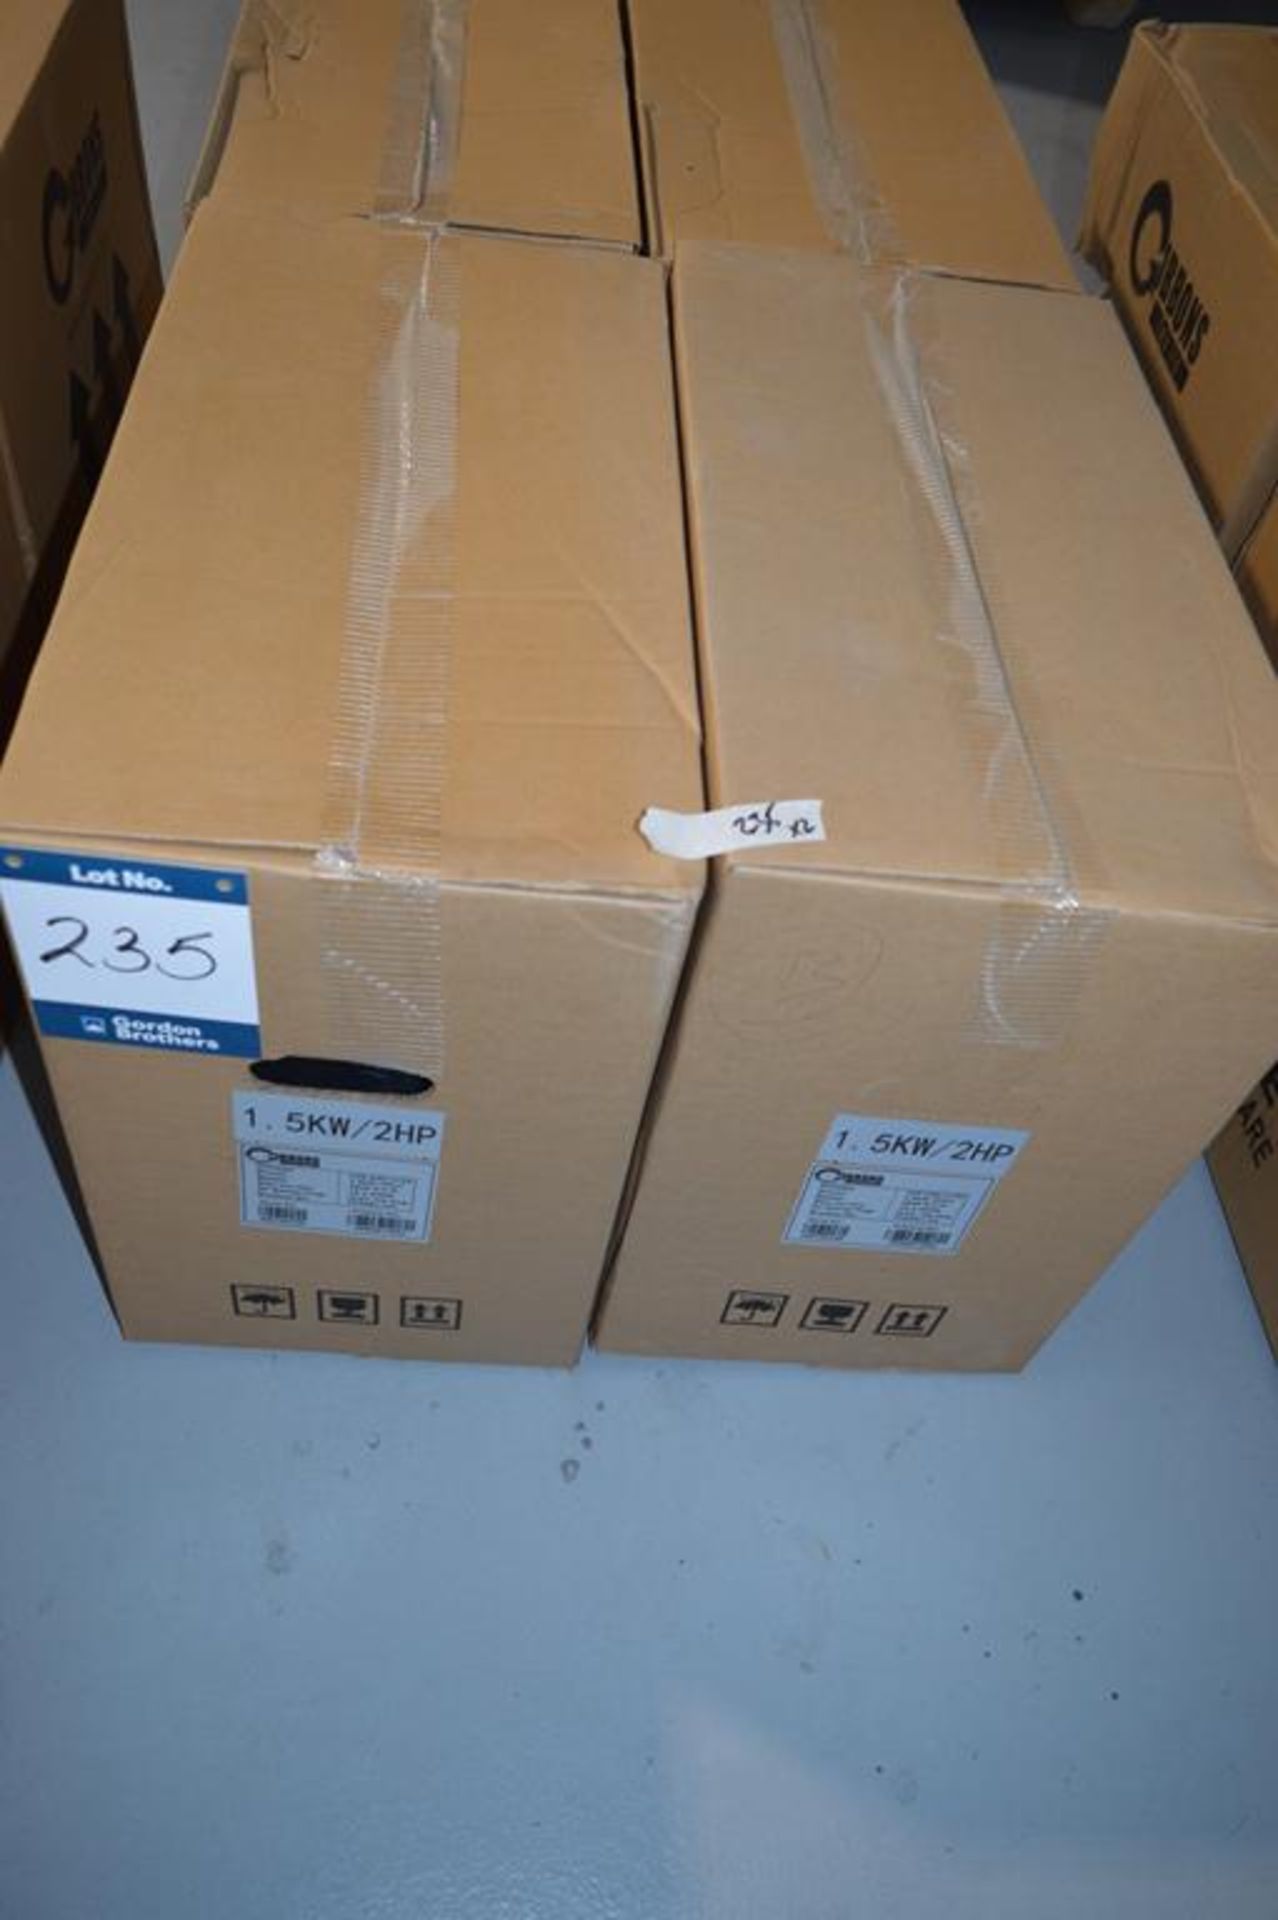 2x (no.) Gibbons, FP5061 blowers, Serial No. XM122728 and XM122729